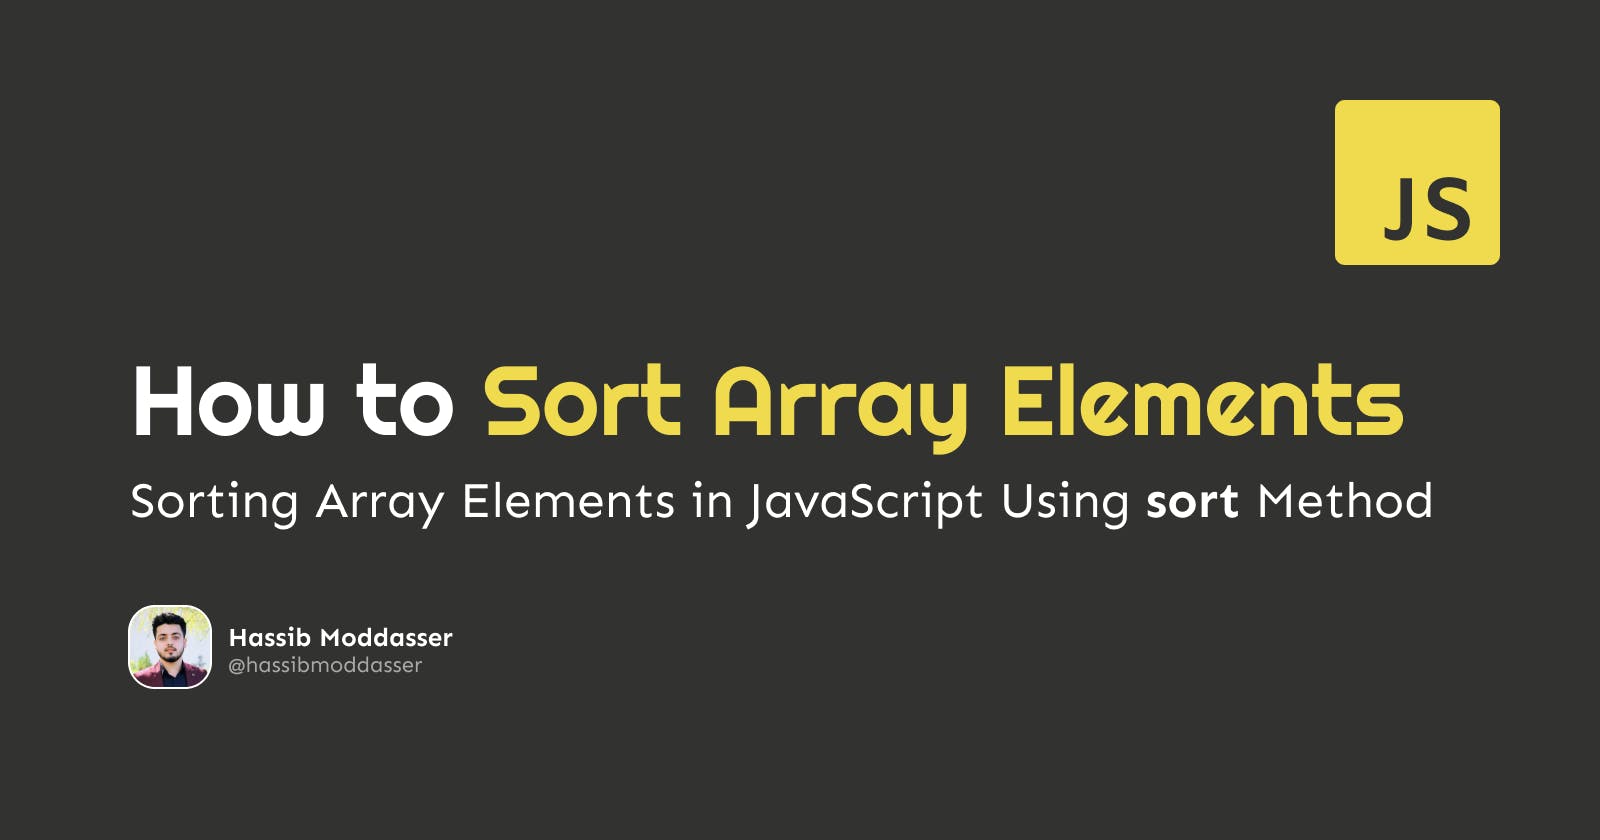 How to Sort Array Elements in JavaScript?